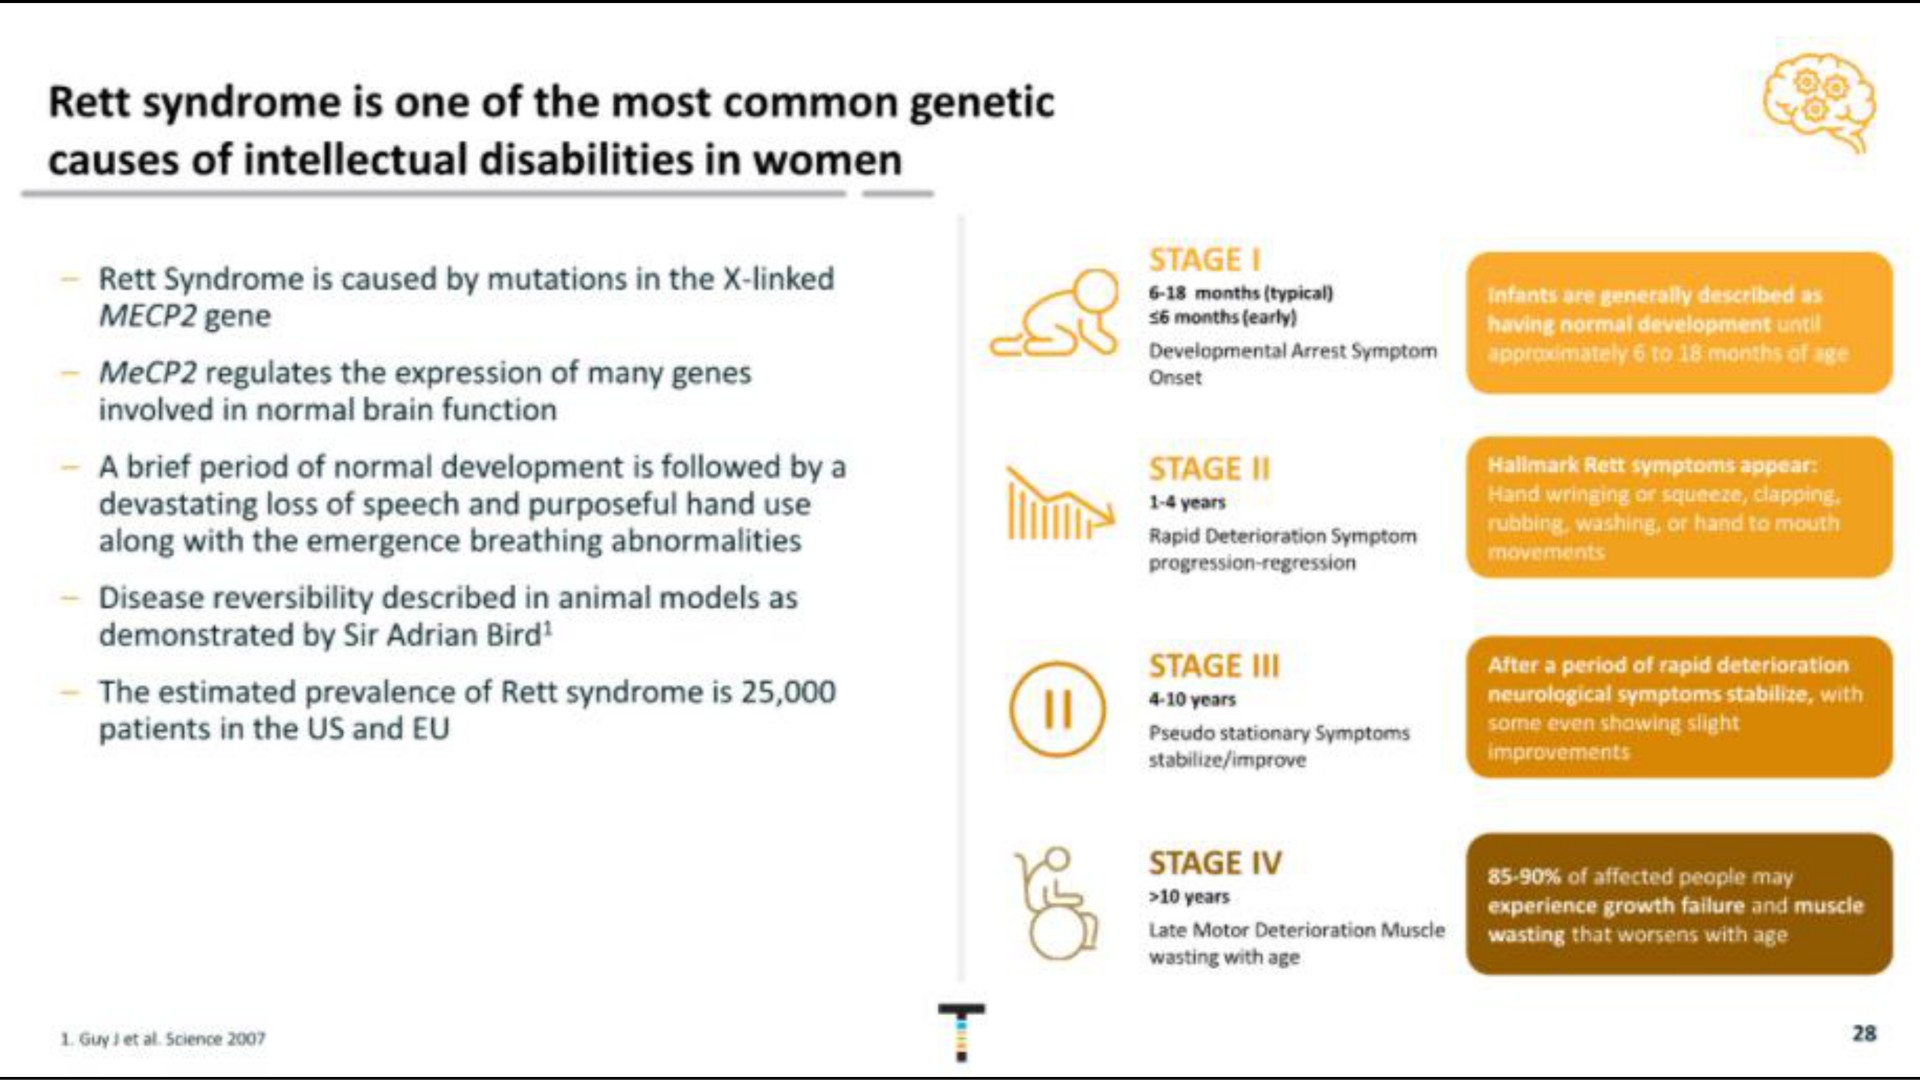 syndrome is one of the most common genetic causes of intellectual disabilities in women | Taysha